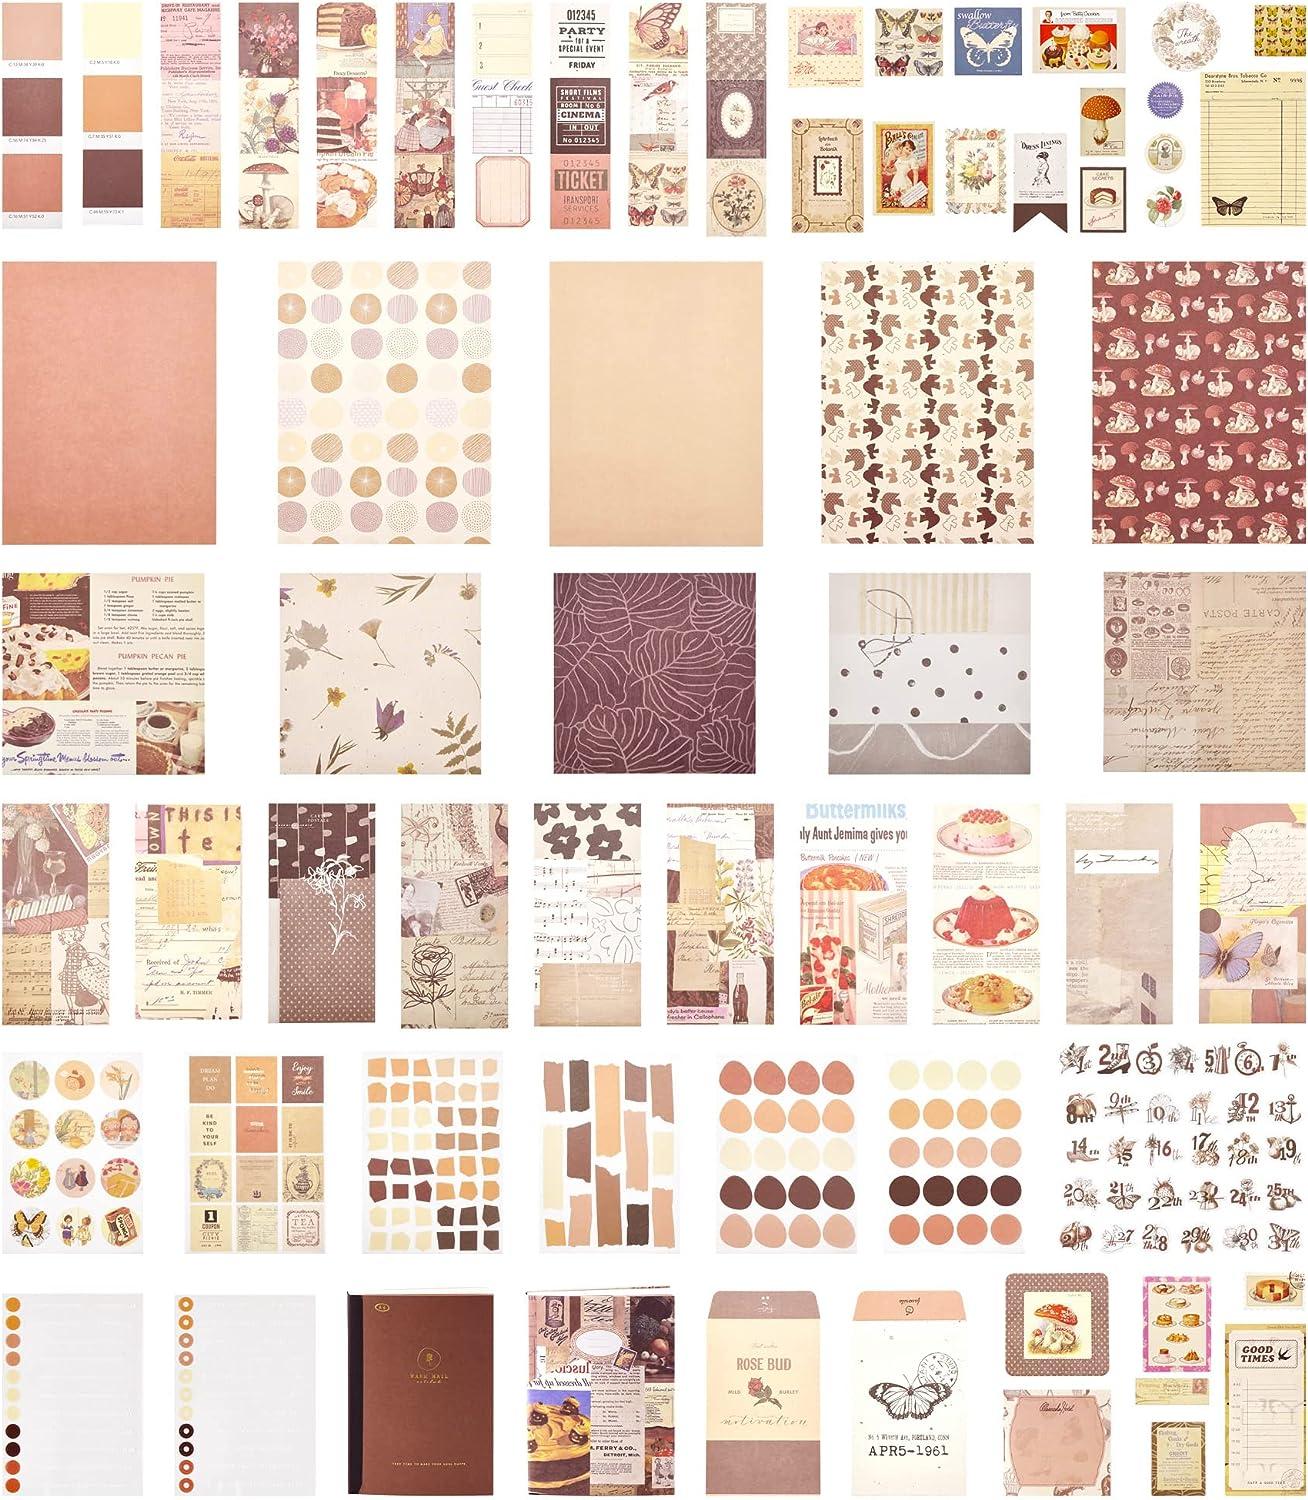 Yoption 346pcs Vintage Scrapbooking Supplies Kit, Aesthetic Scrapbook Kit  for Bullet Journal Supplies with Scrapbooking Stickers, Stationery, A6 Grid  Notebook, DIY Craft Gift for Teen Girl Kid Women